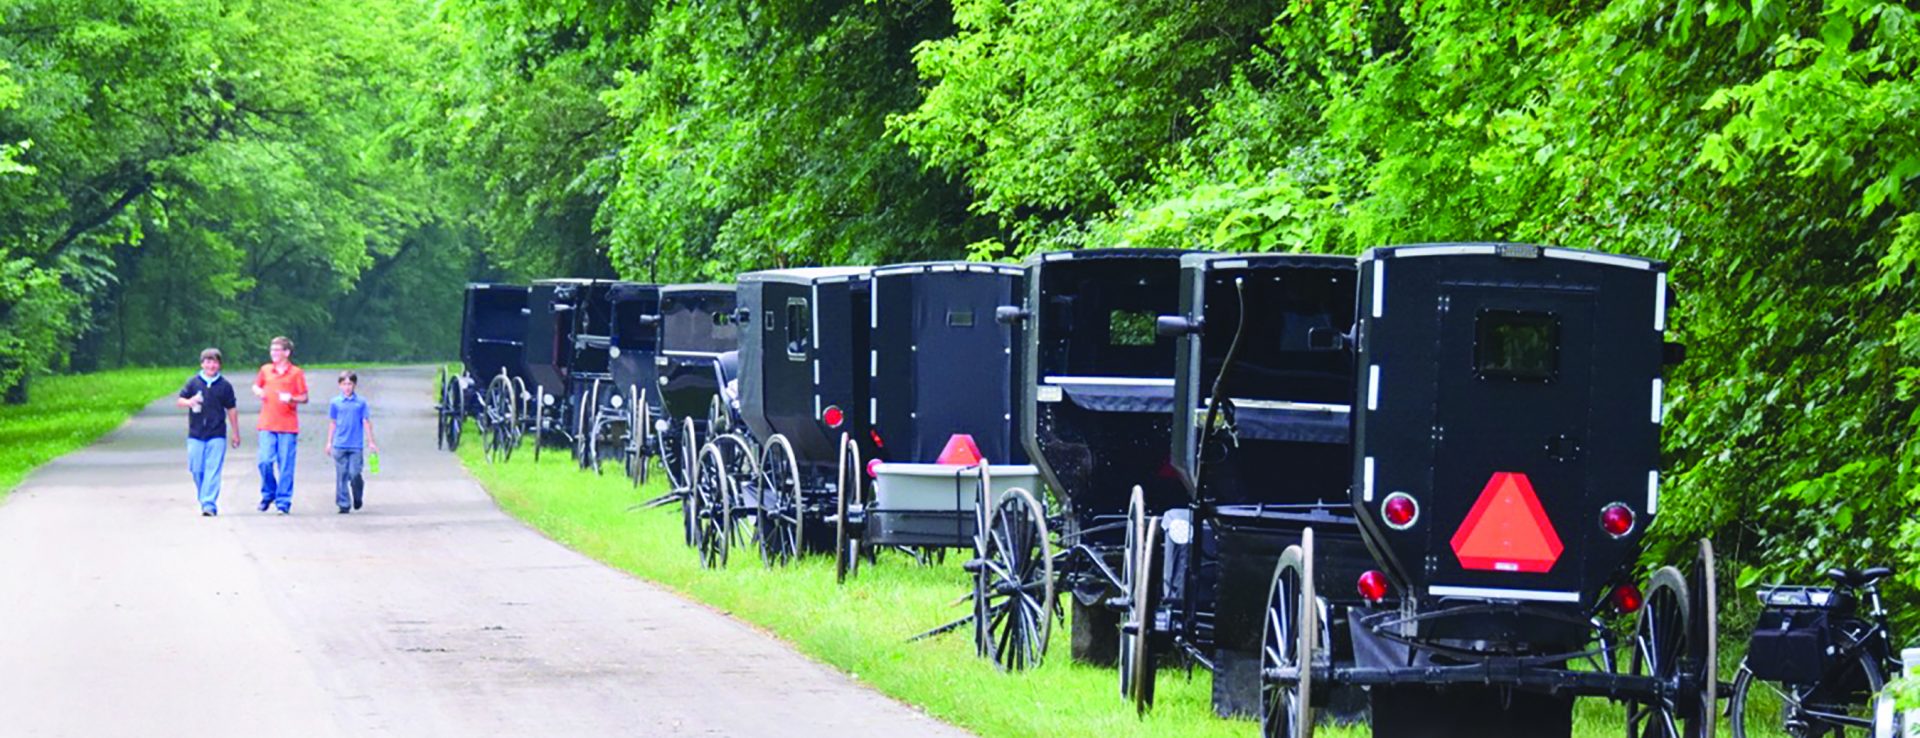 Holmes County Trail | Ohio's Amish Country